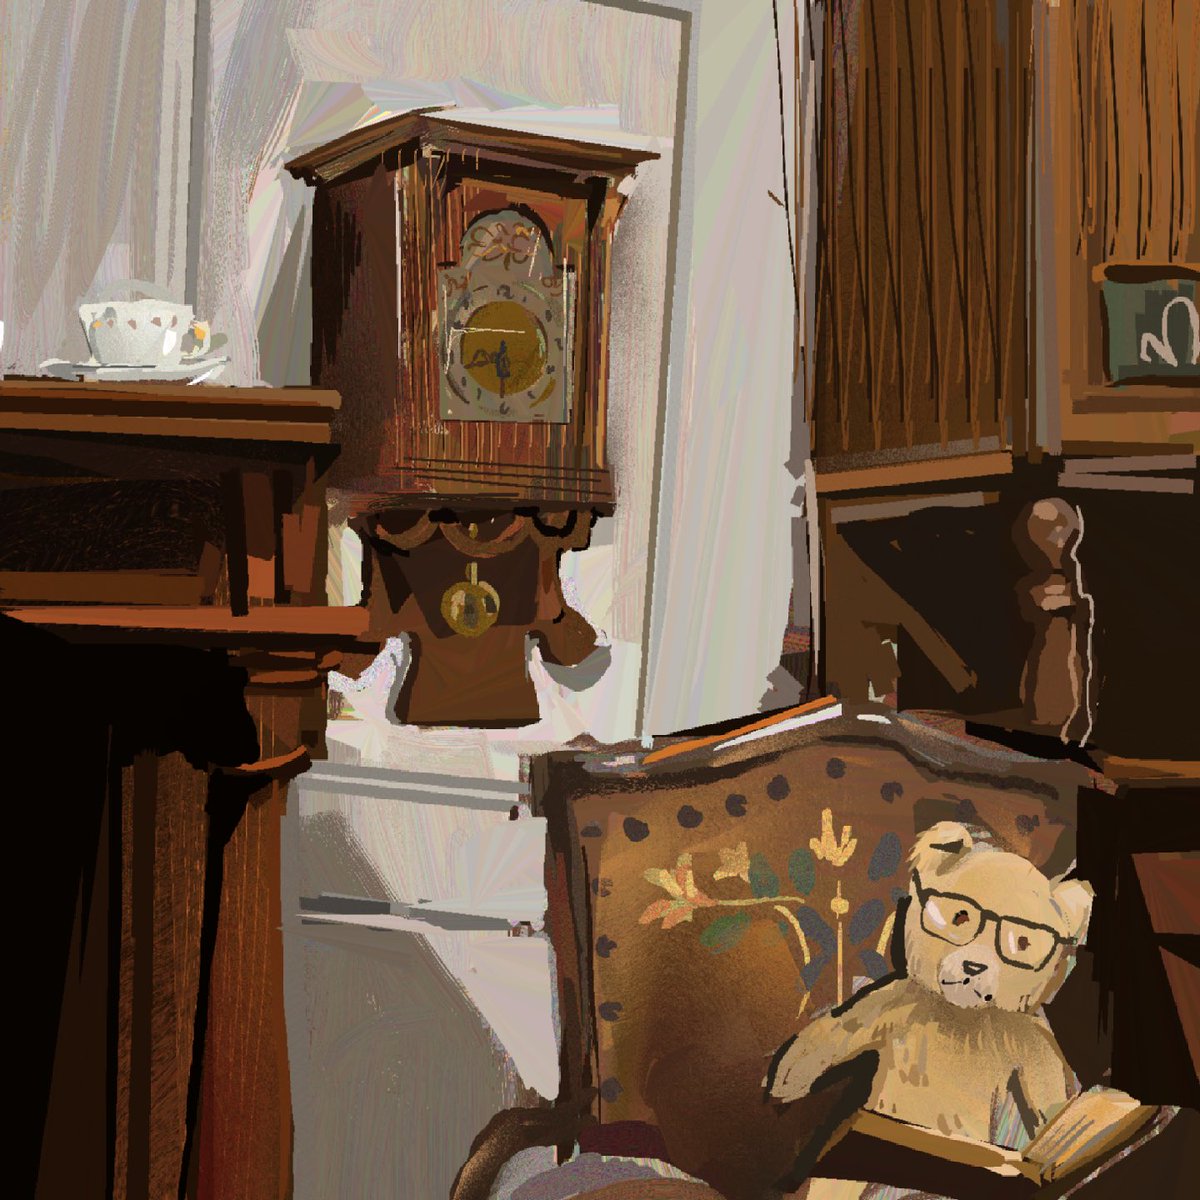 「This cute lil bear at the antique store 」|SiBのイラスト